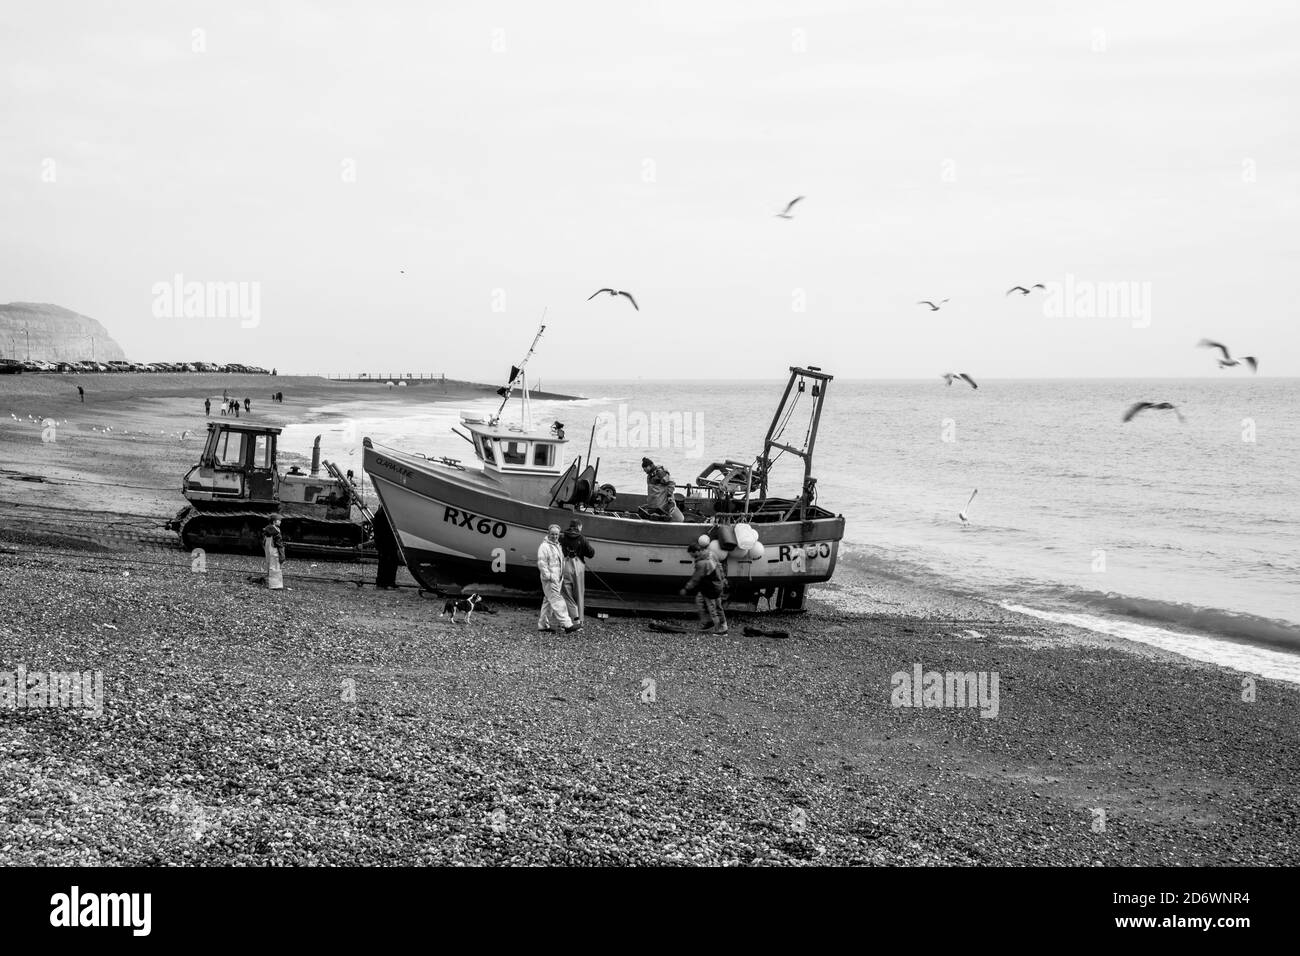 Fishing boat on being hauled up beach at Hastings, Sussex, UK. Stock Photo